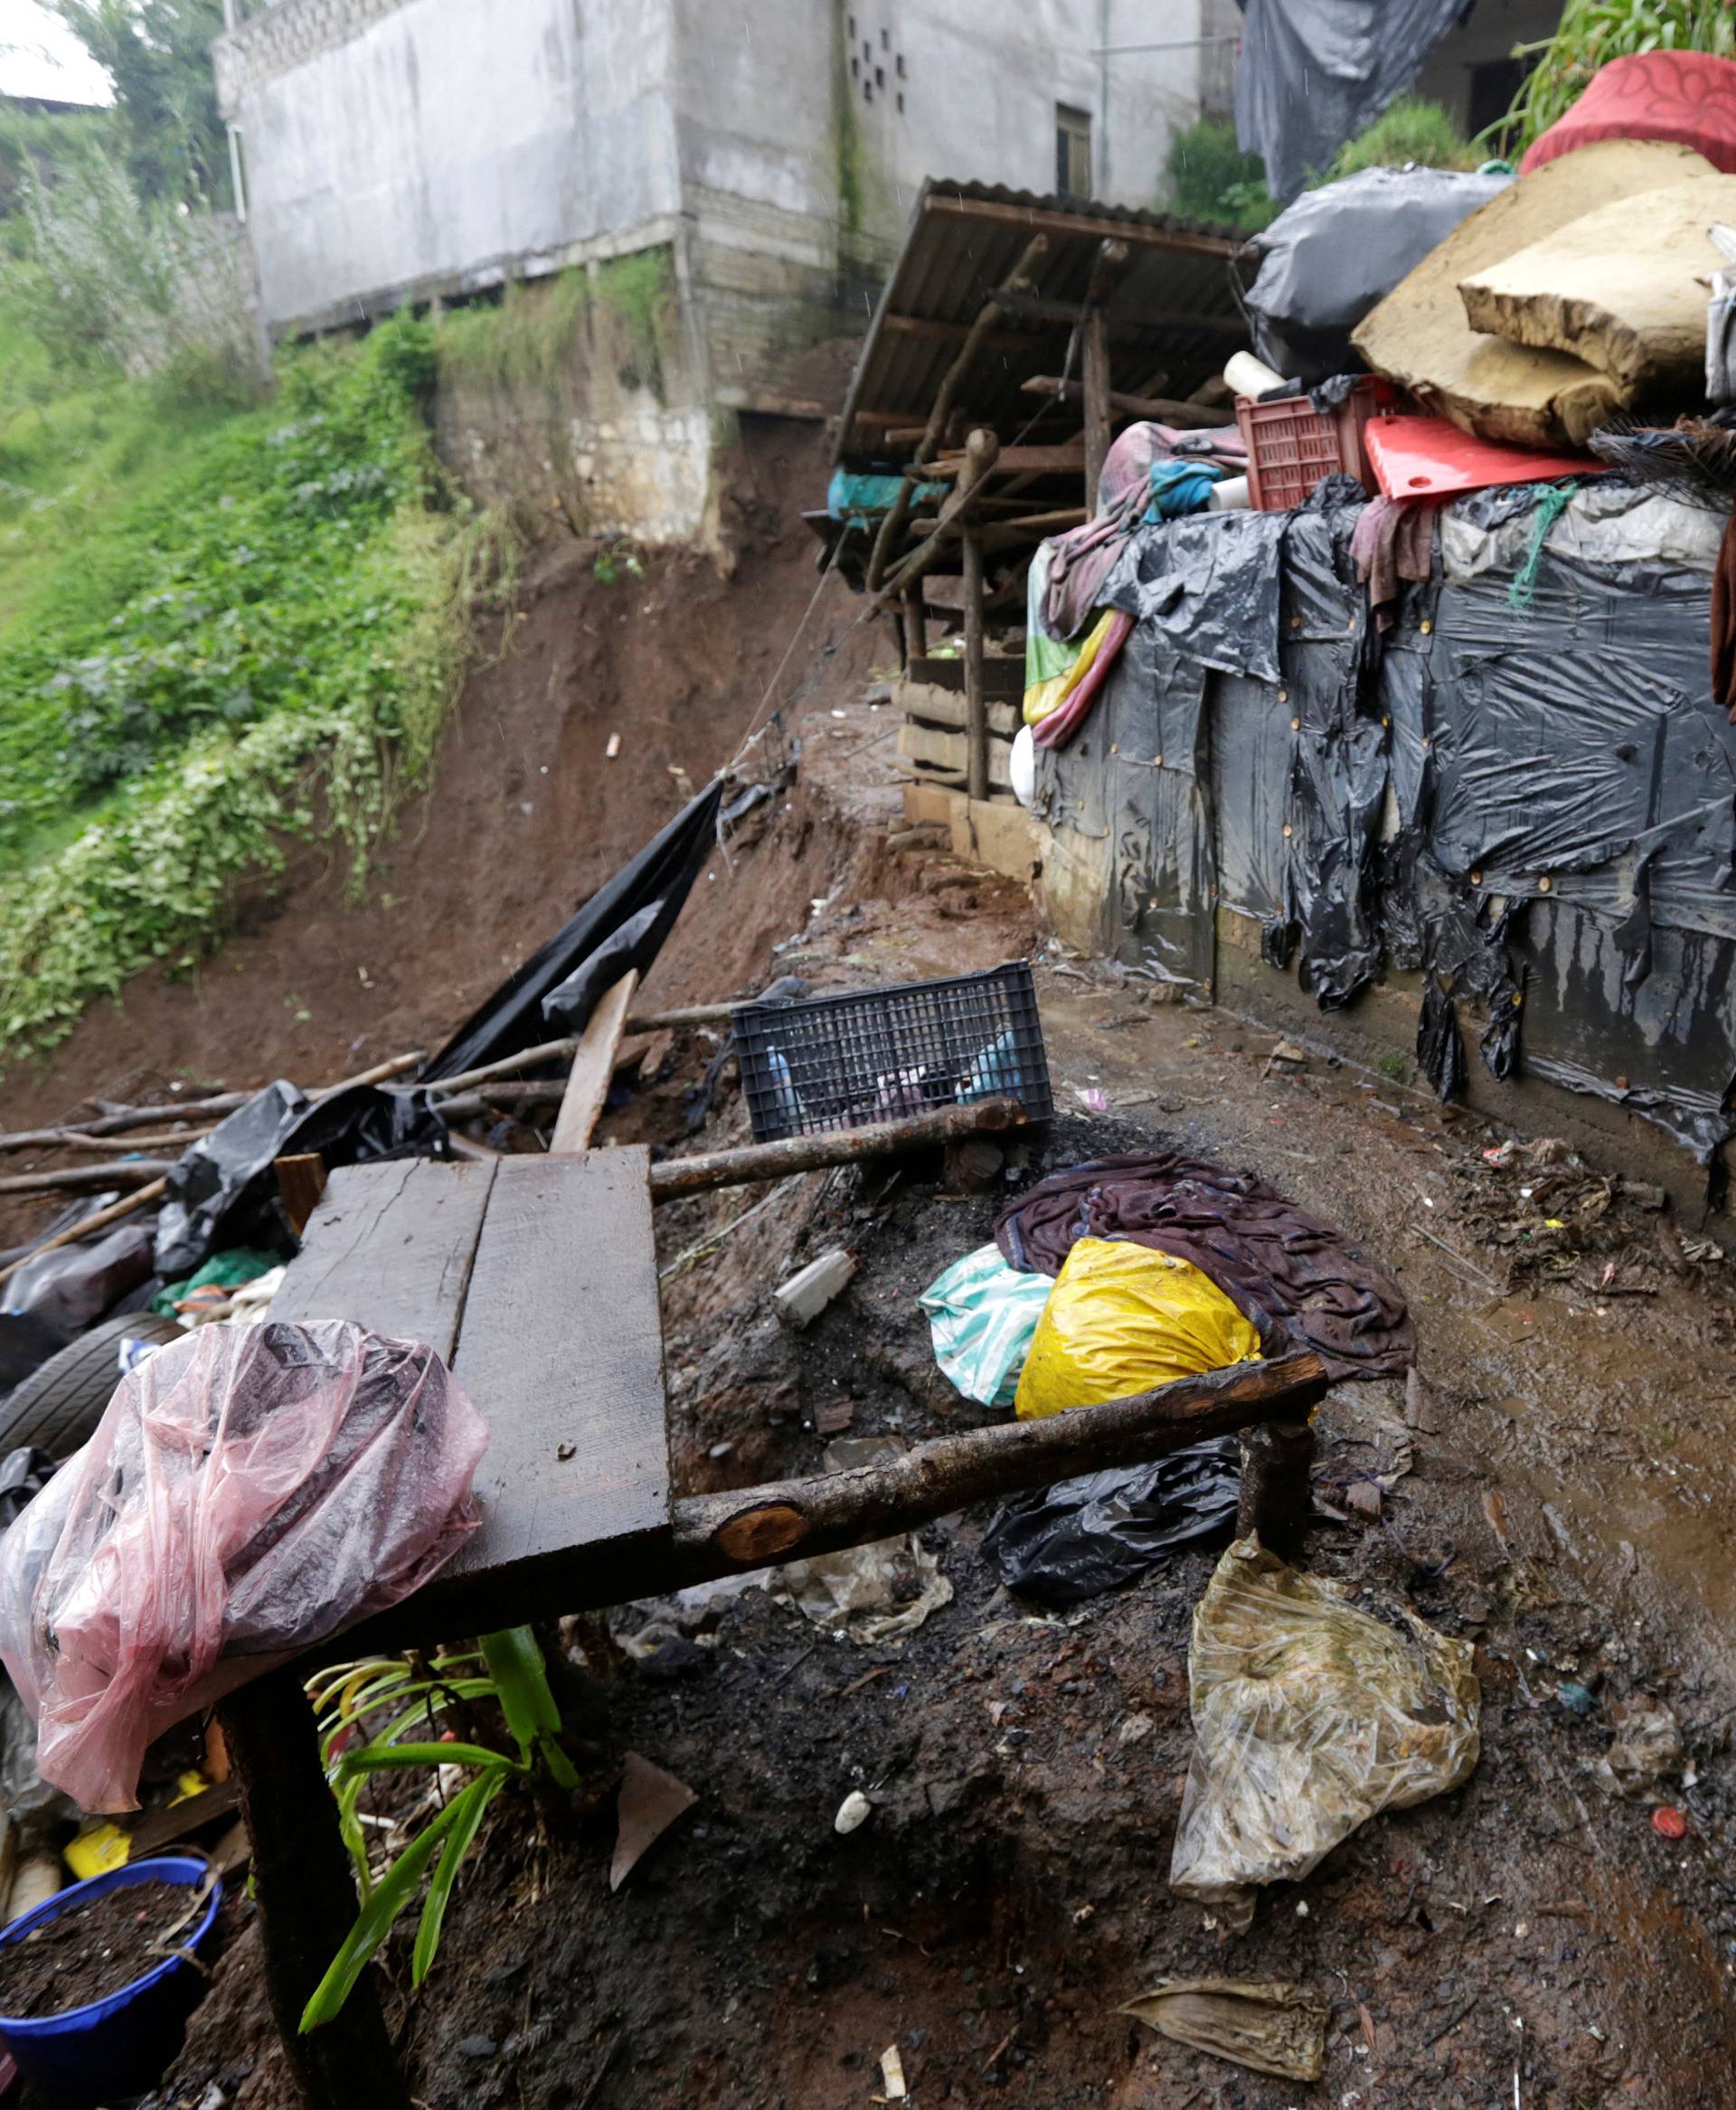 A child shields from the rain as he stands near his house damaged after a mudslide following heavy showers caused by the passing of Tropical Storm Earl, in the town of Huauchinango